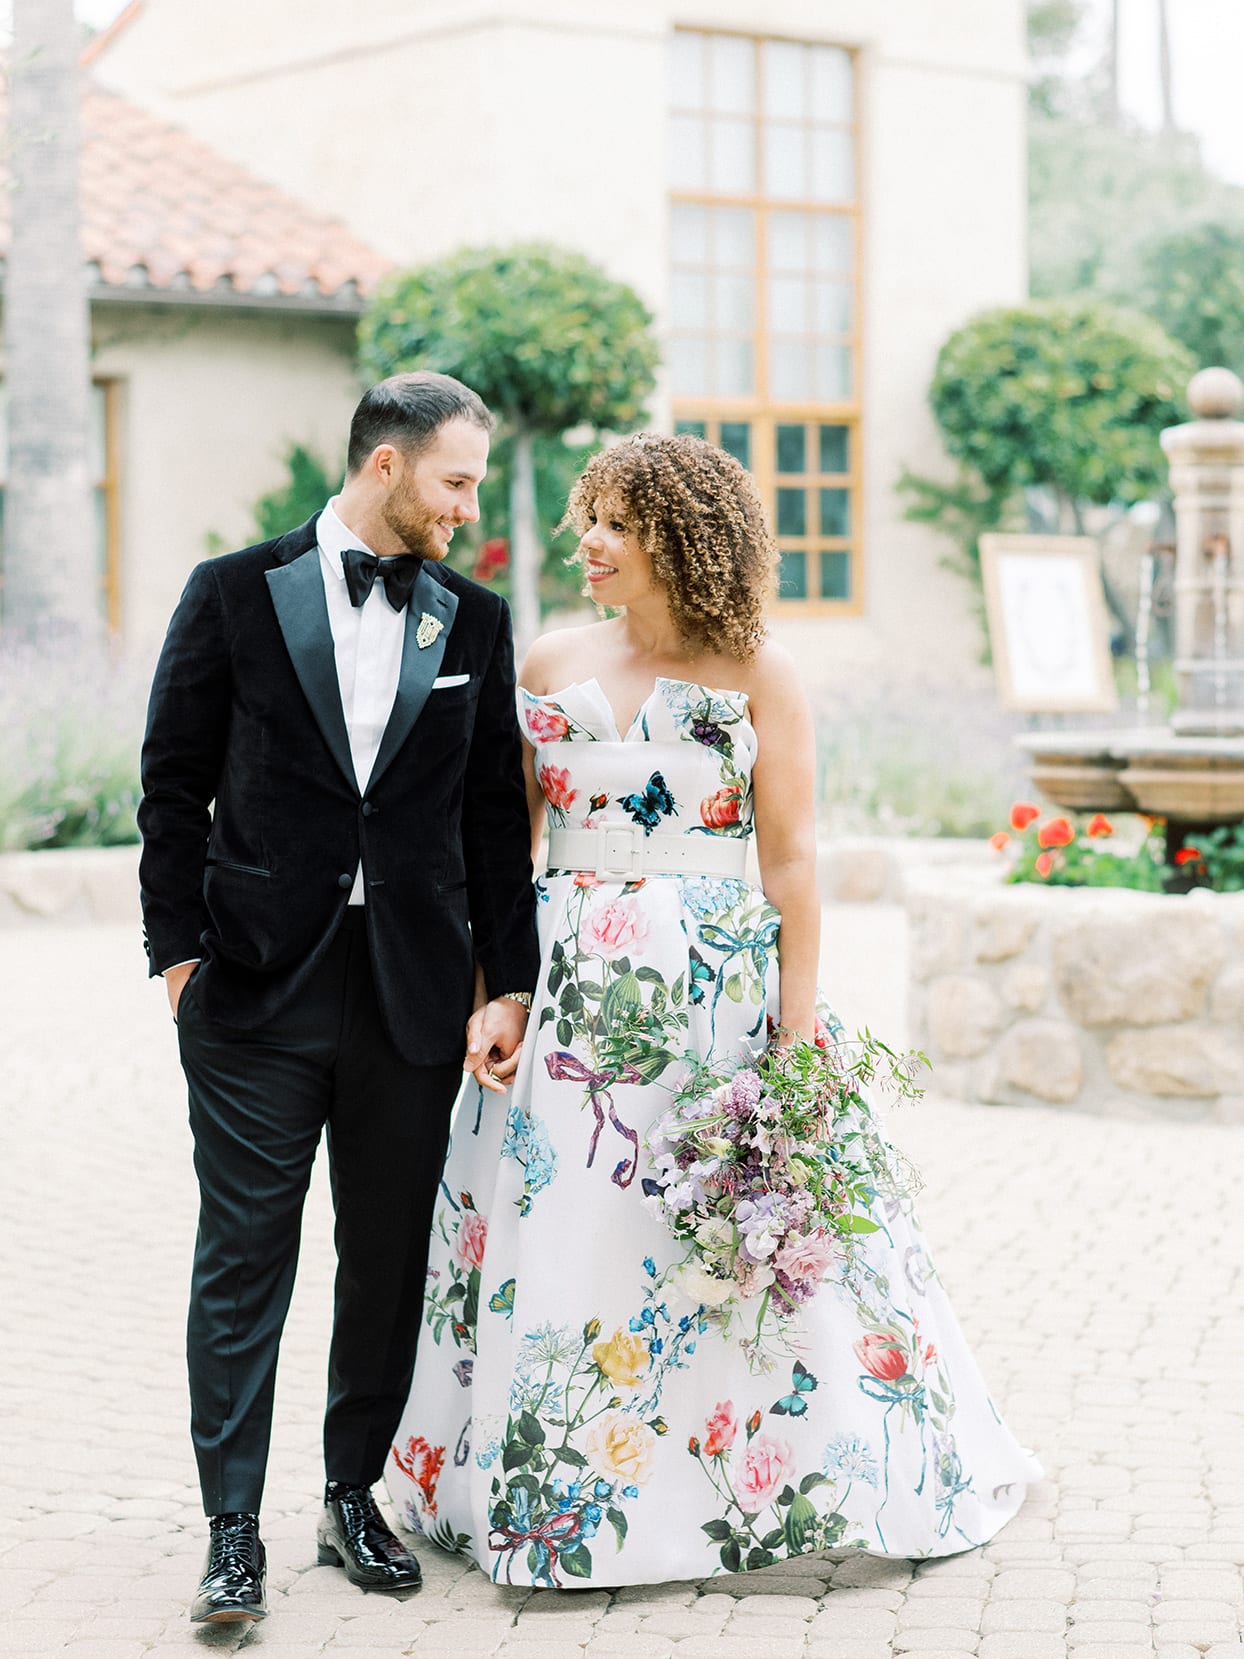 This Bride’s Floral Wedding Dress Foreshadowed the Flower- and Butterfly-Filled Reception to Come